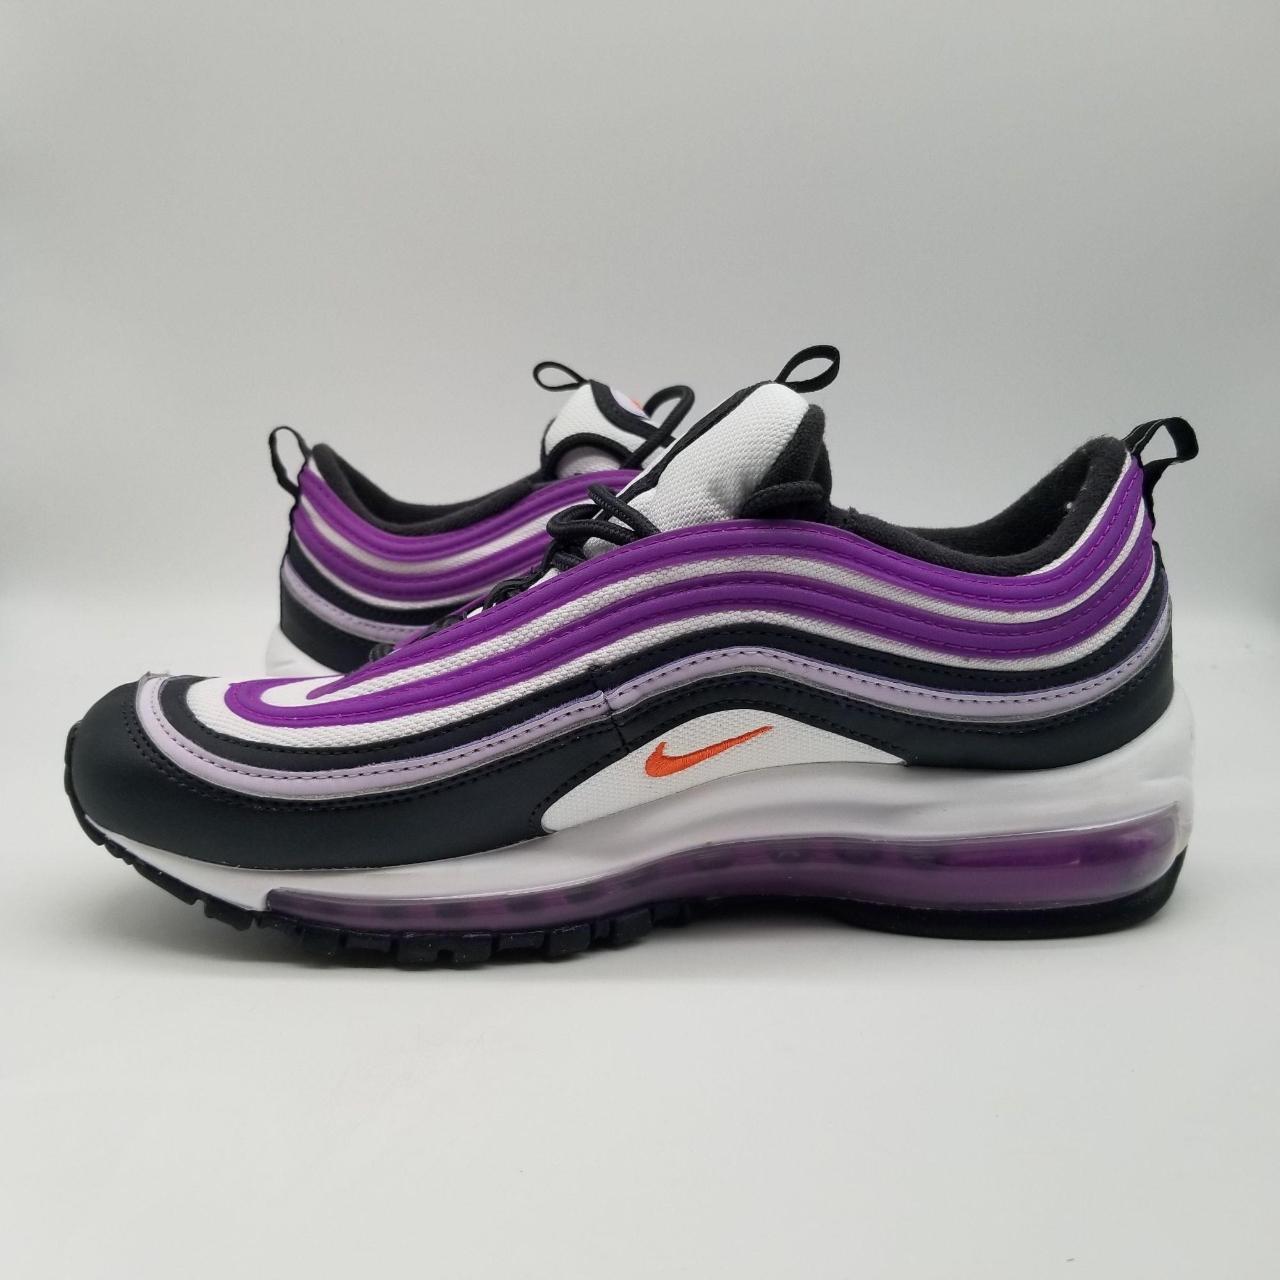 Product Image 4 - You are buying: Nike Air